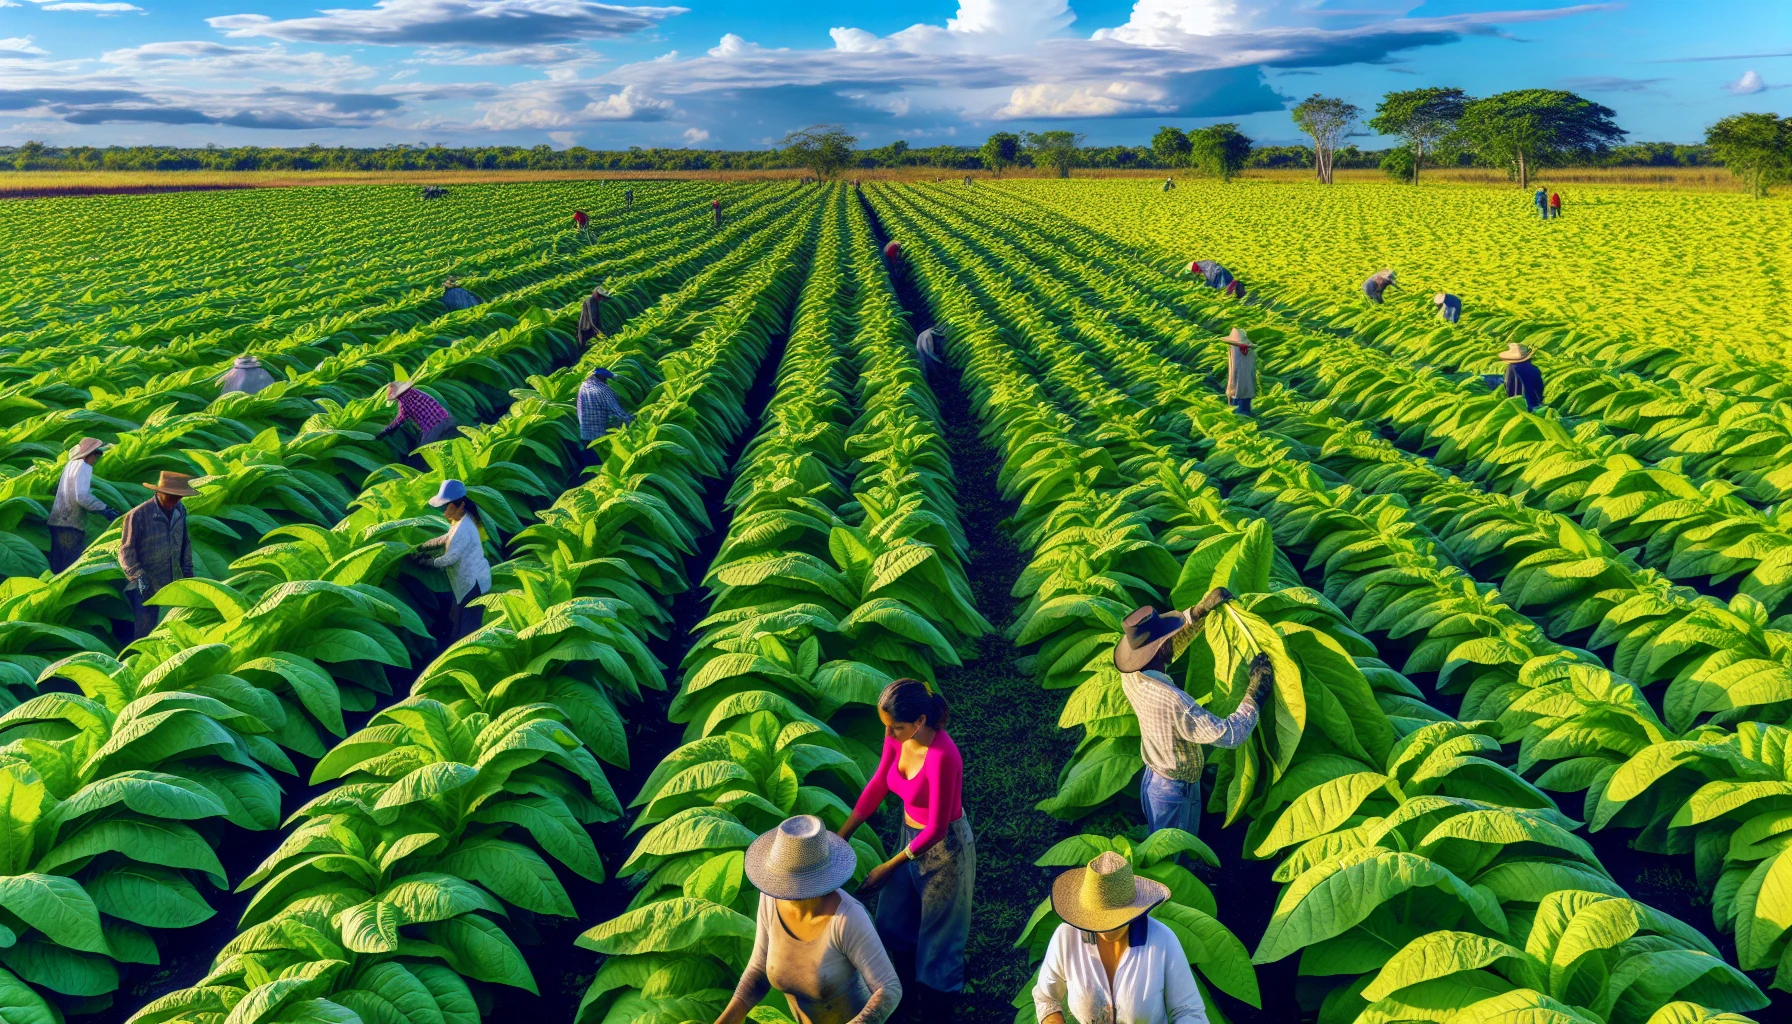 A field of tobacco plants on a Nicaraguan farm